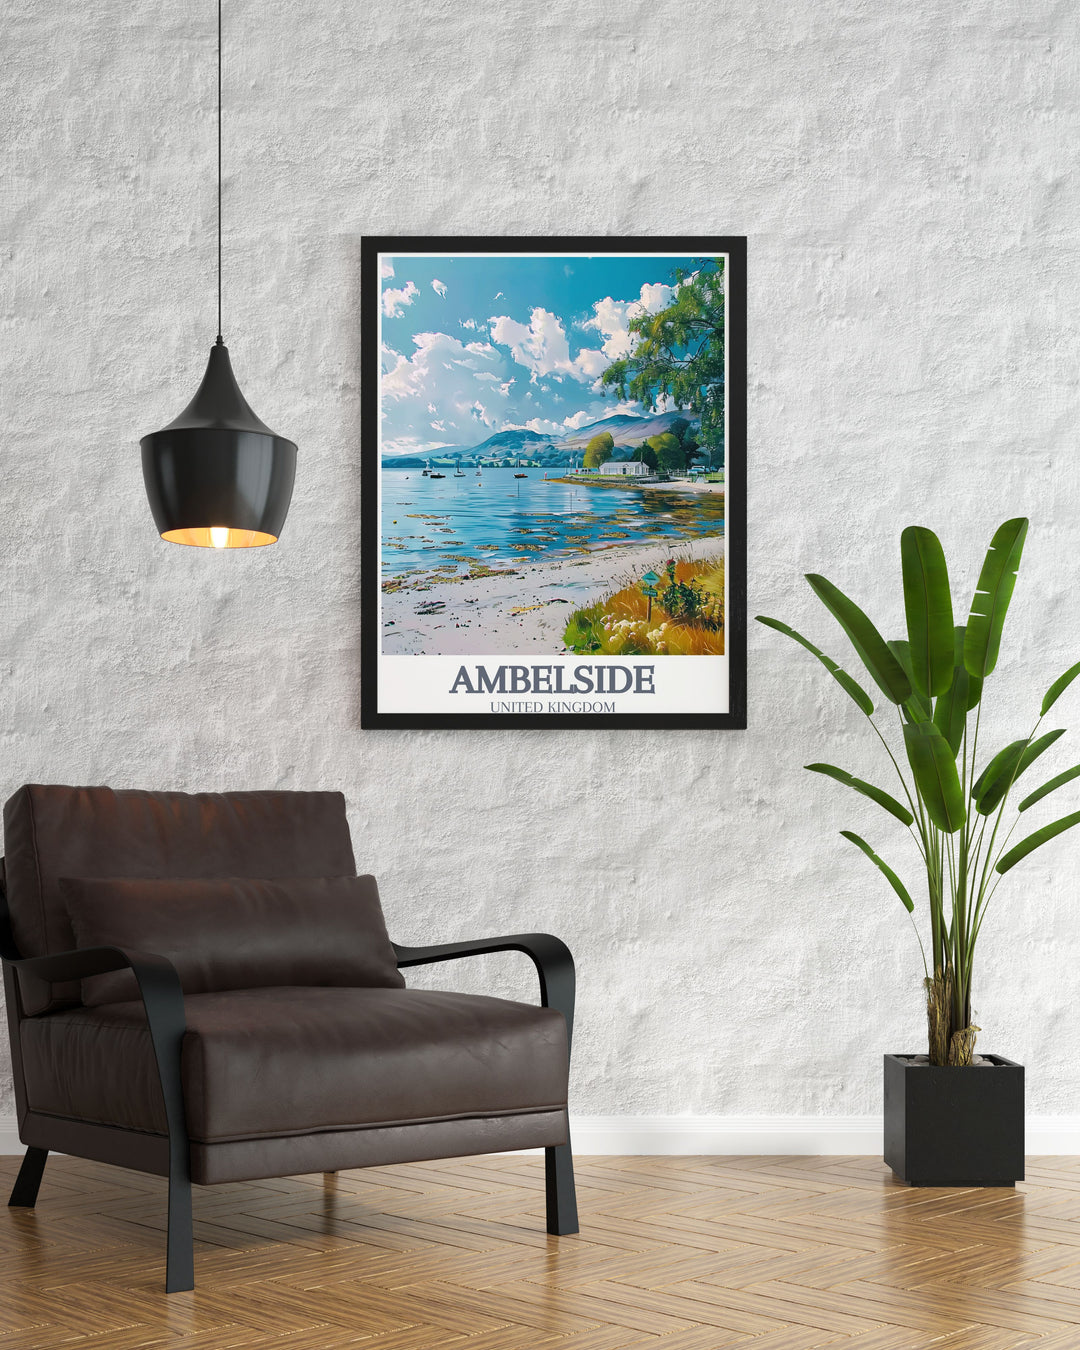 Scenic print of Borrans Park in Ambleside, offering a glimpse into the verdant landscapes and serene atmosphere of this beloved public park.